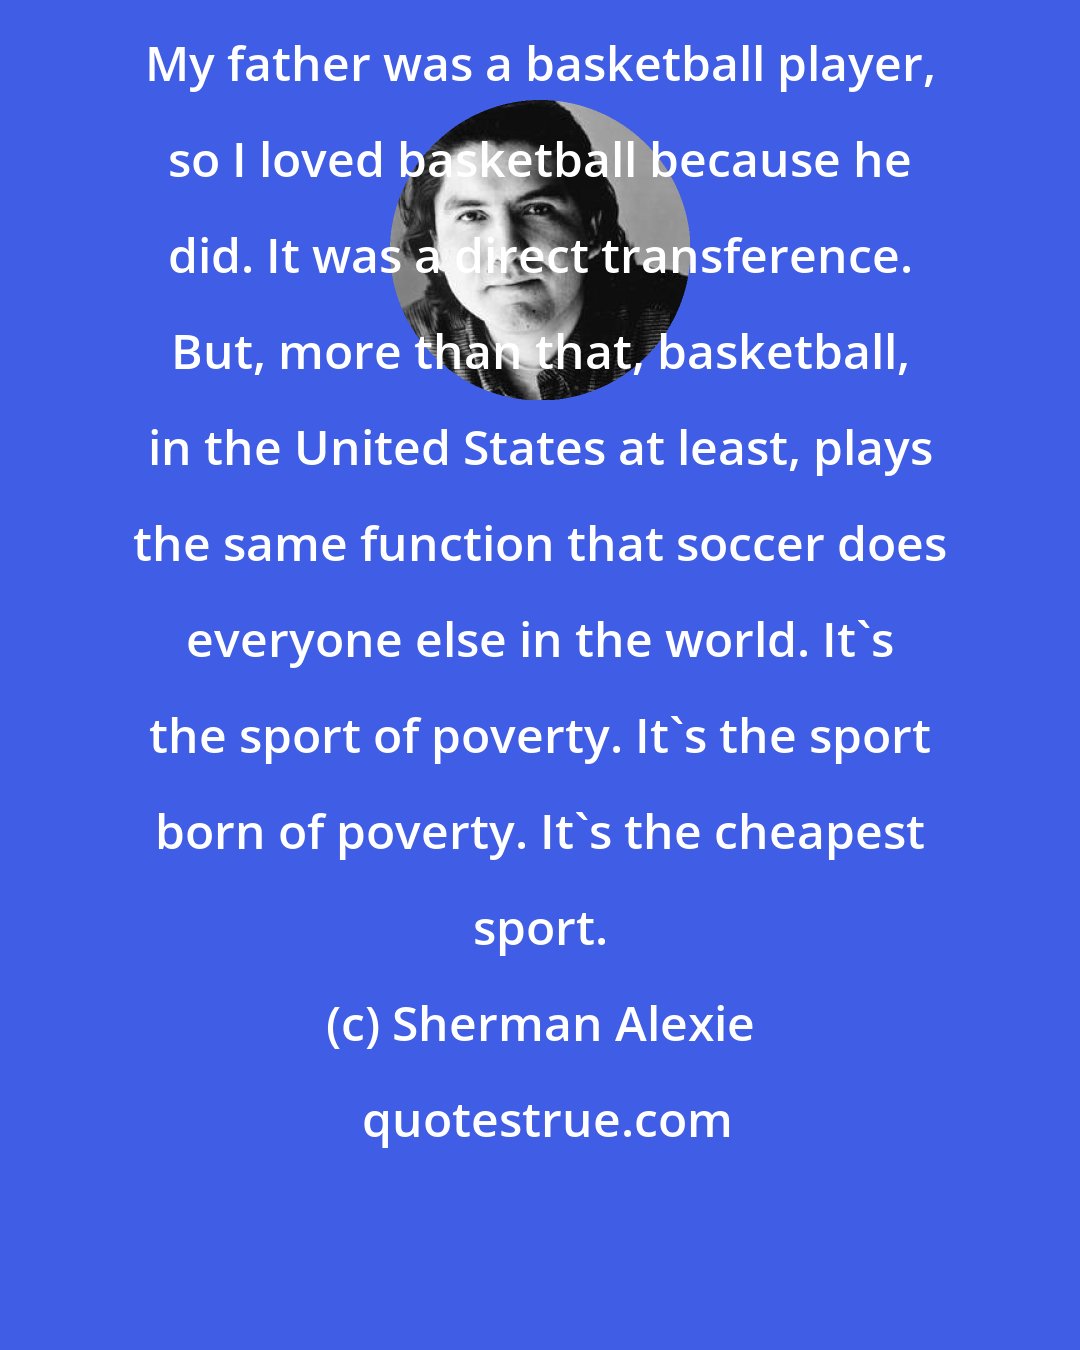 Sherman Alexie: My father was a basketball player, so I loved basketball because he did. It was a direct transference. But, more than that, basketball, in the United States at least, plays the same function that soccer does everyone else in the world. It's the sport of poverty. It's the sport born of poverty. It's the cheapest sport.